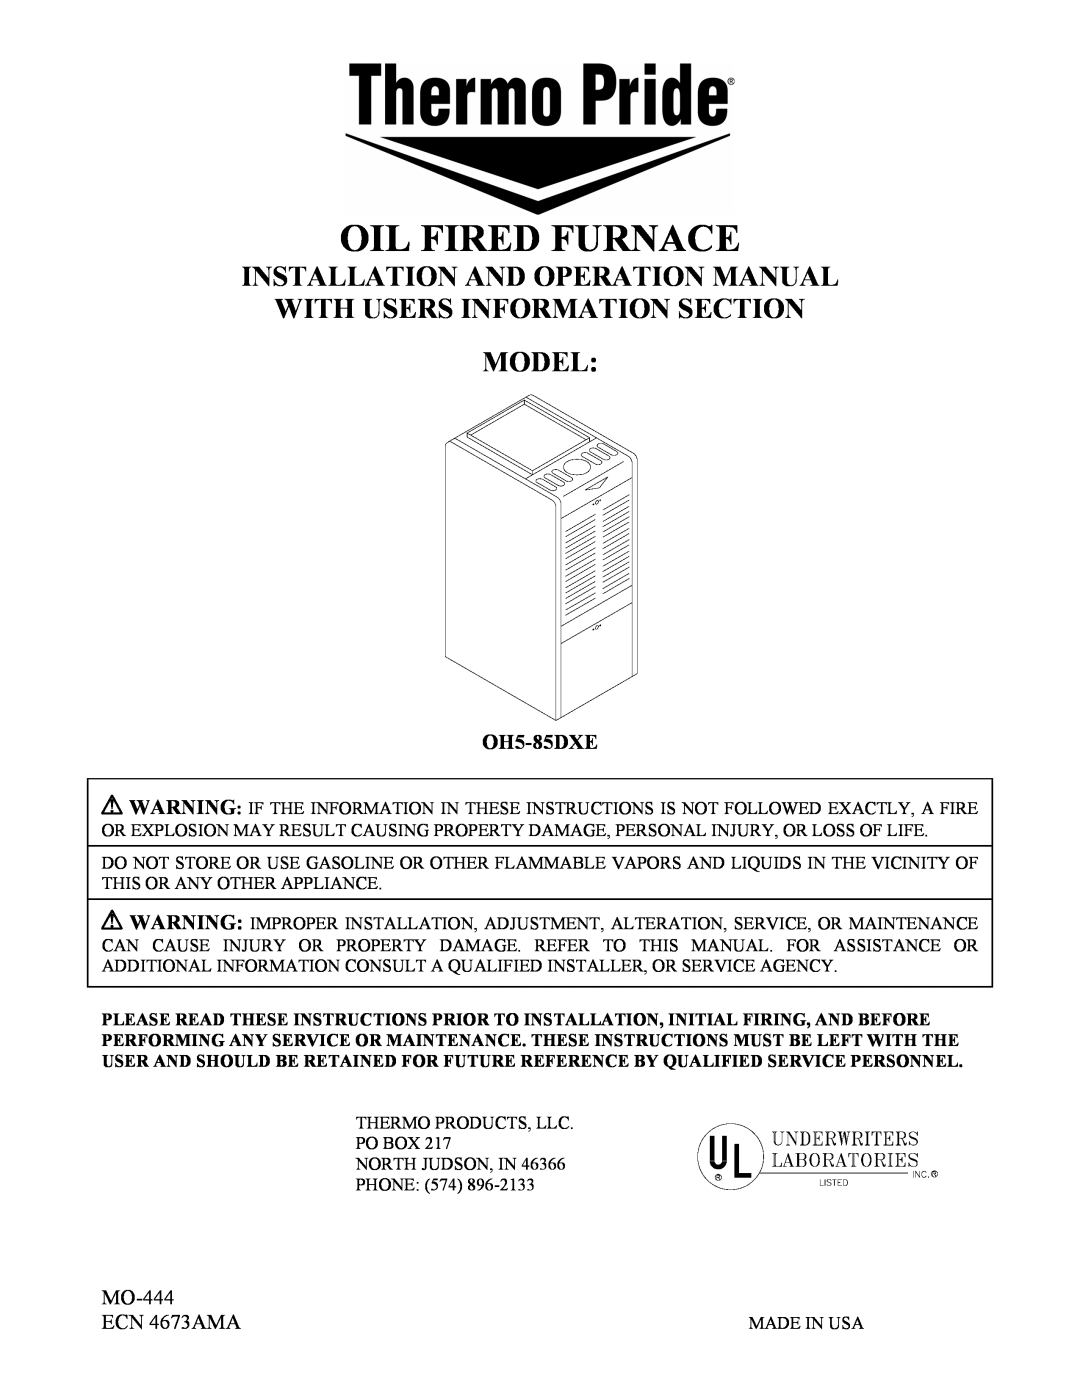 Thermo Products OH5-85DXE operation manual Oil Fired Furnace, With Users Information Section Model 